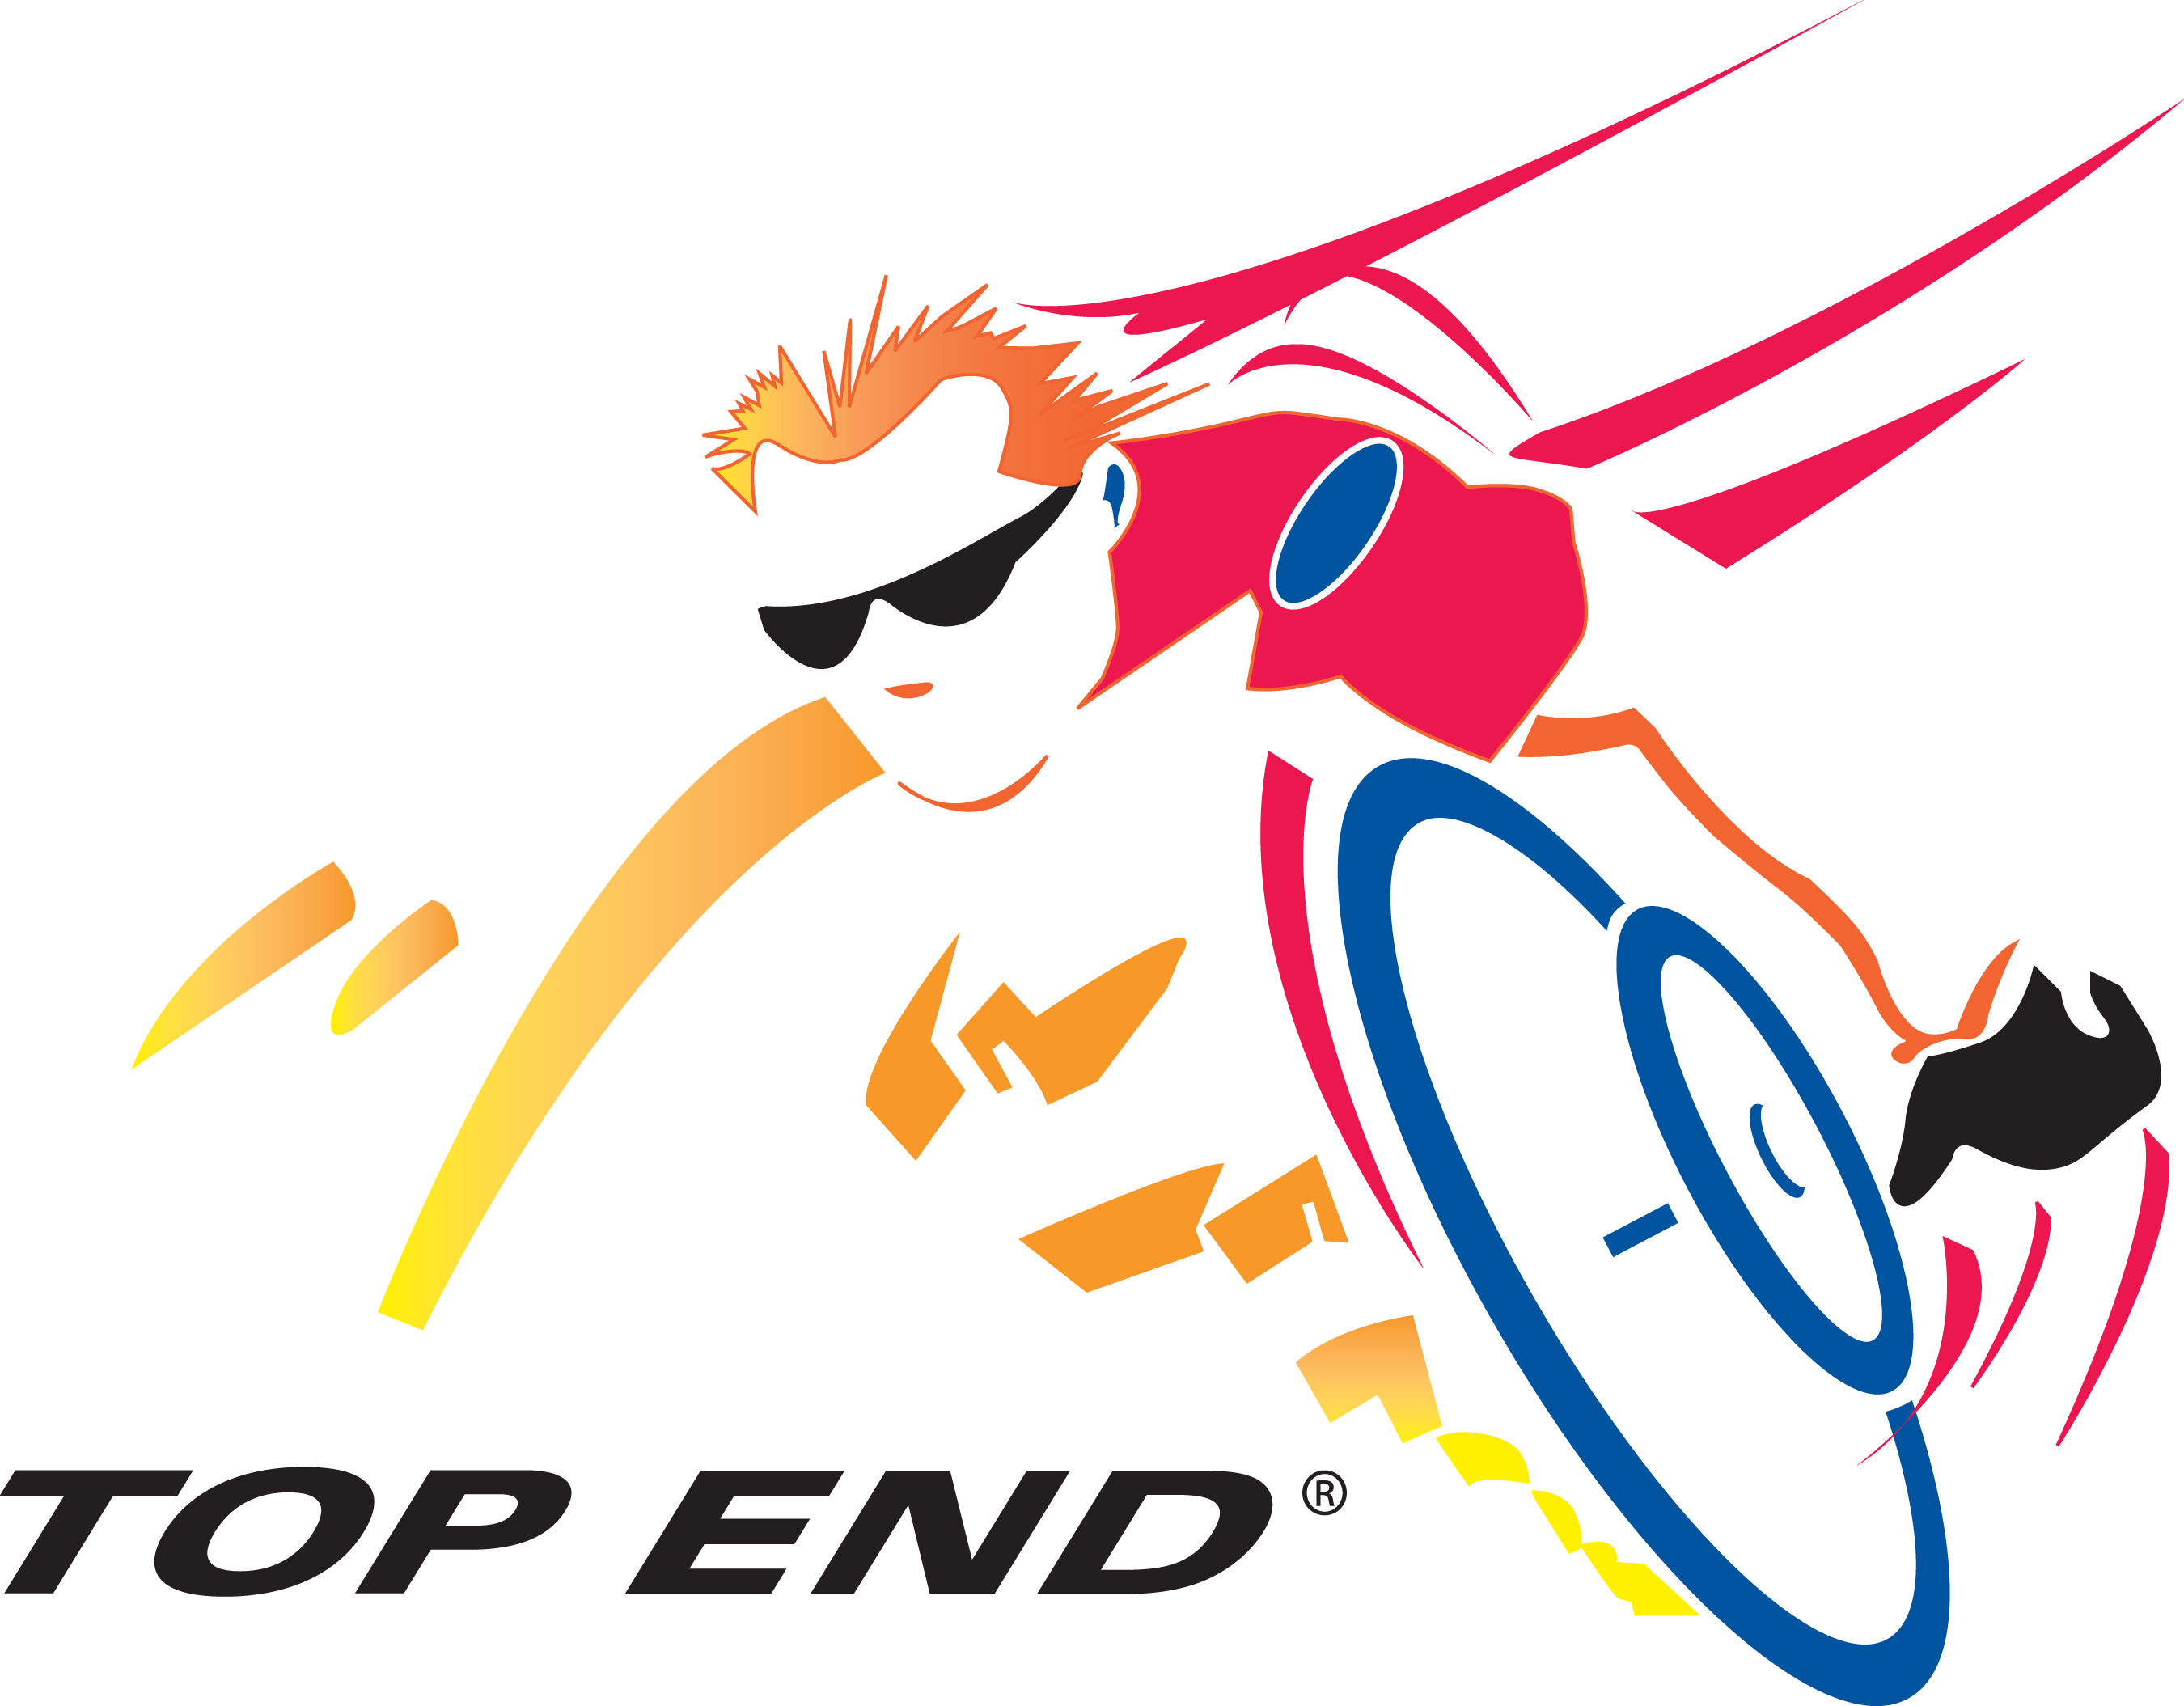 Thank You To Our Sponsors - Top End Wheelchair (2700x2109)